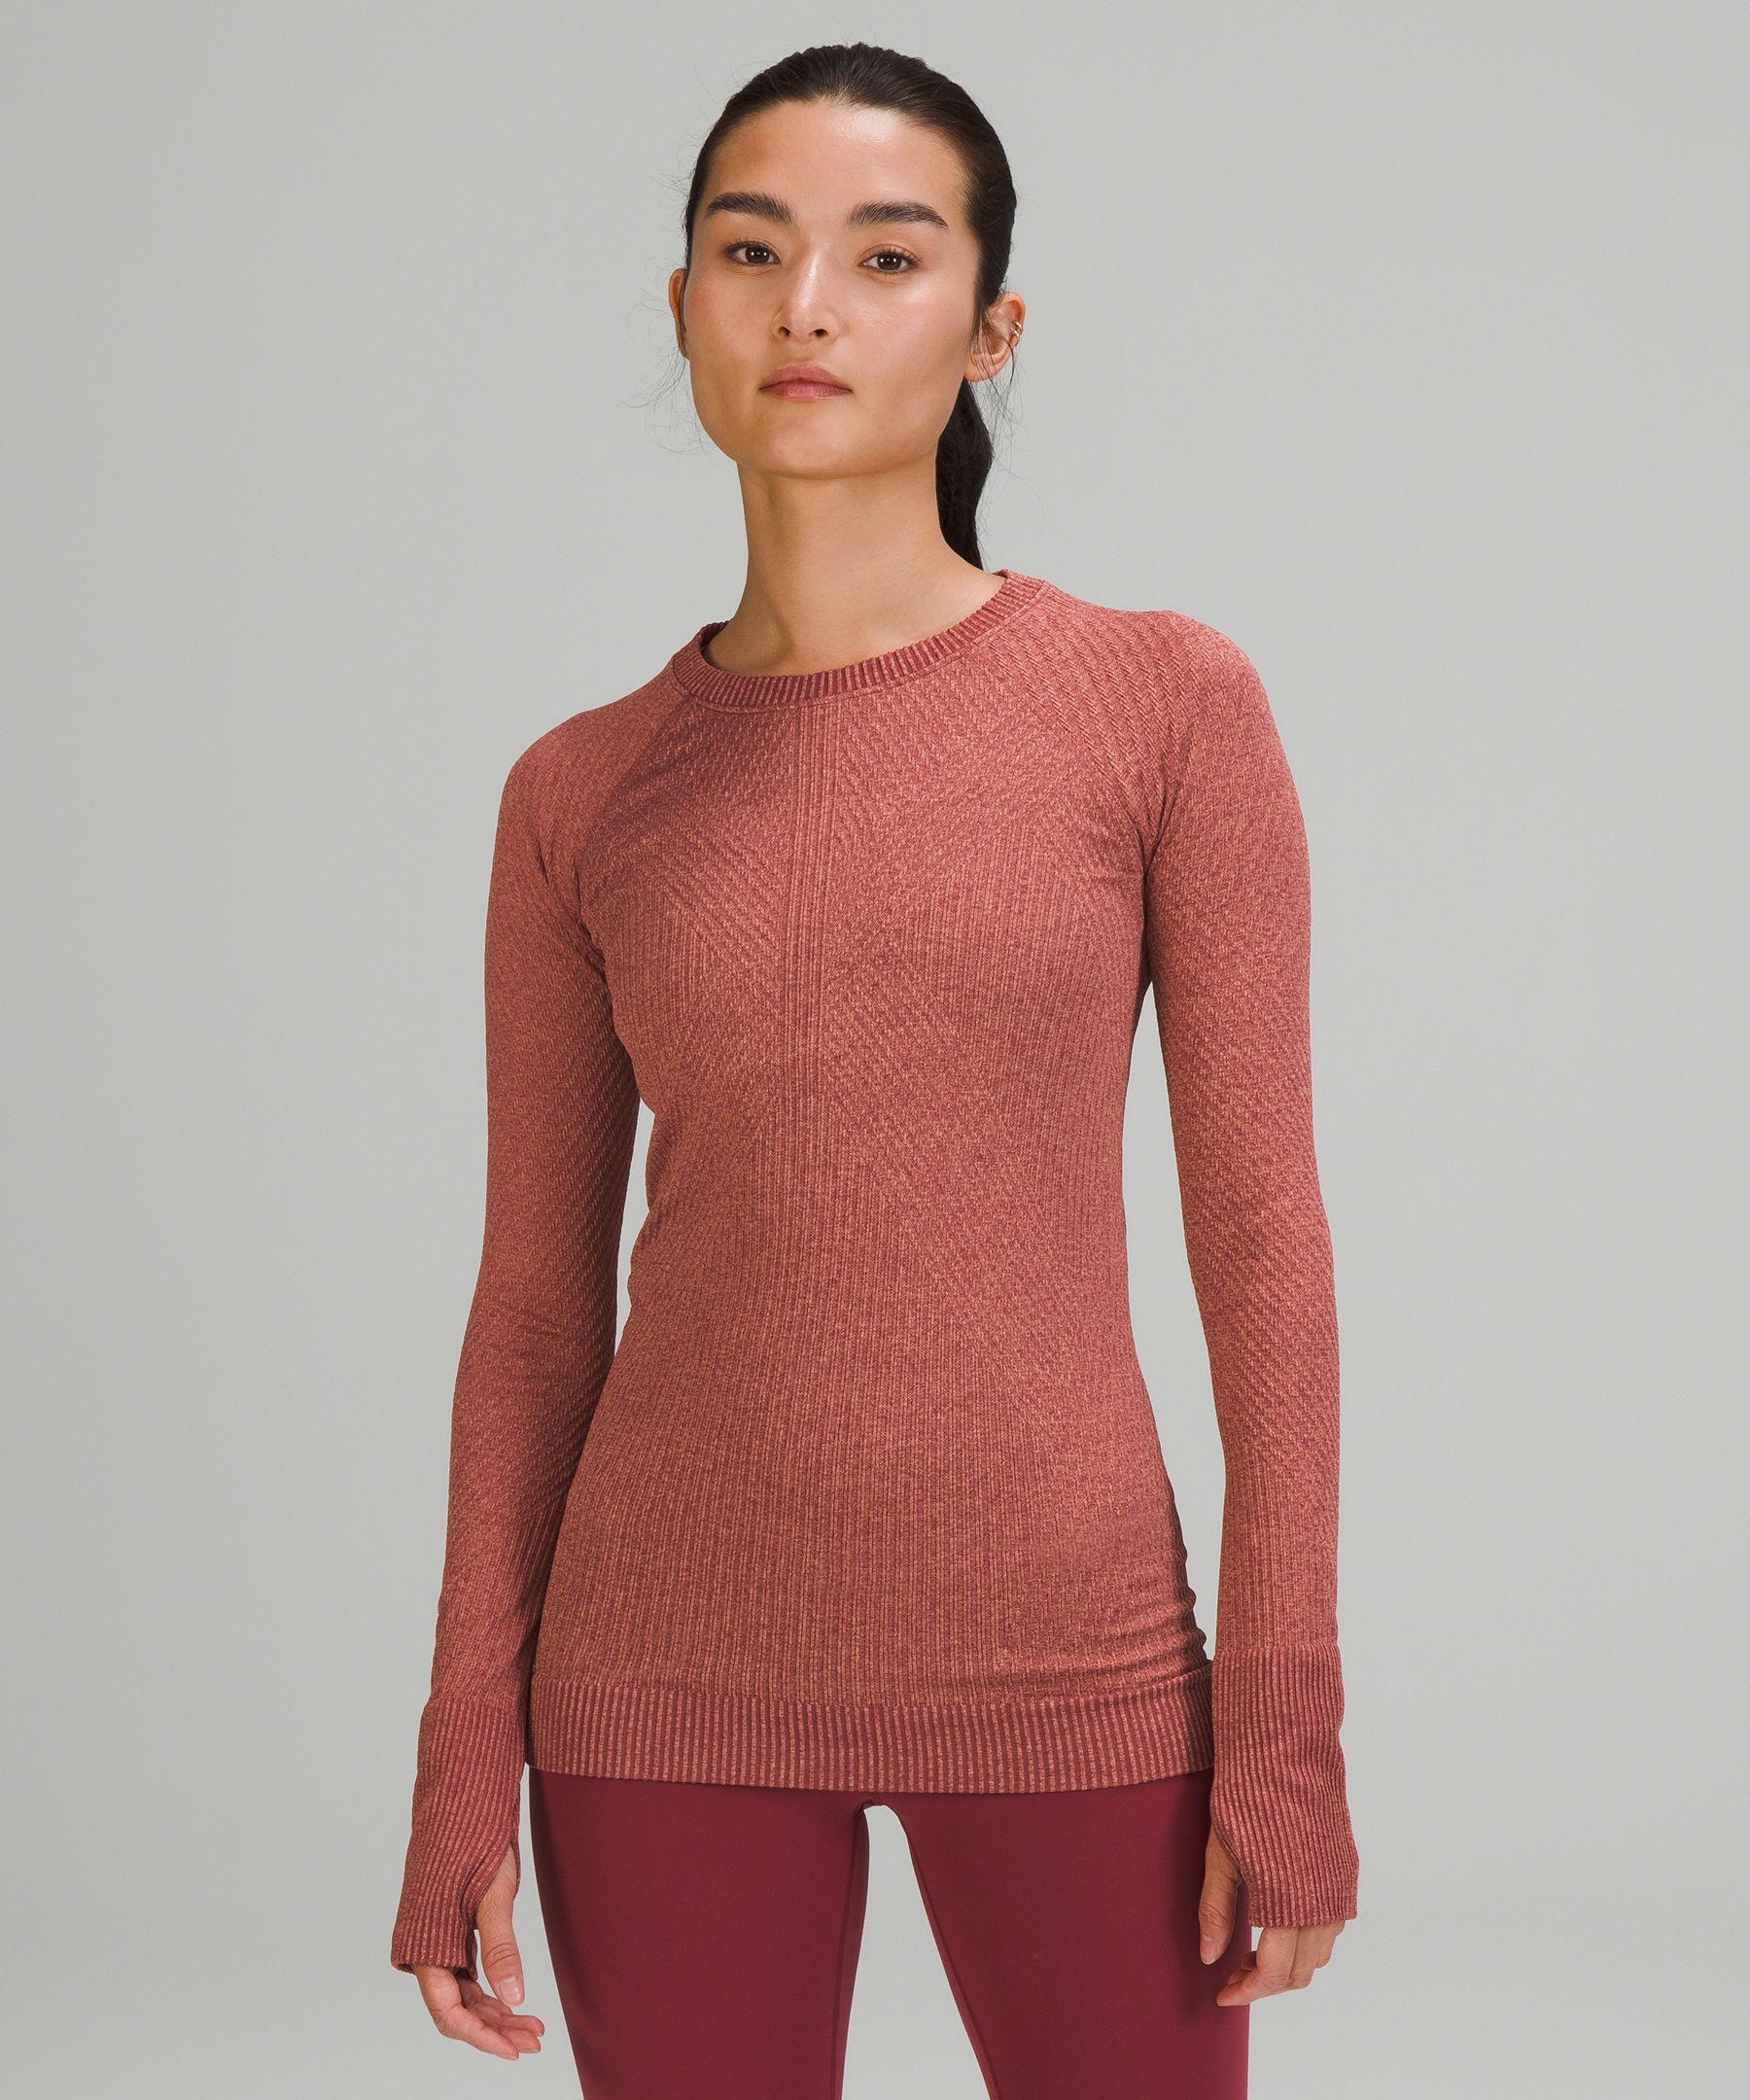 Lululemon Rest Less Pullover In Mulled Wine/pink Savannah